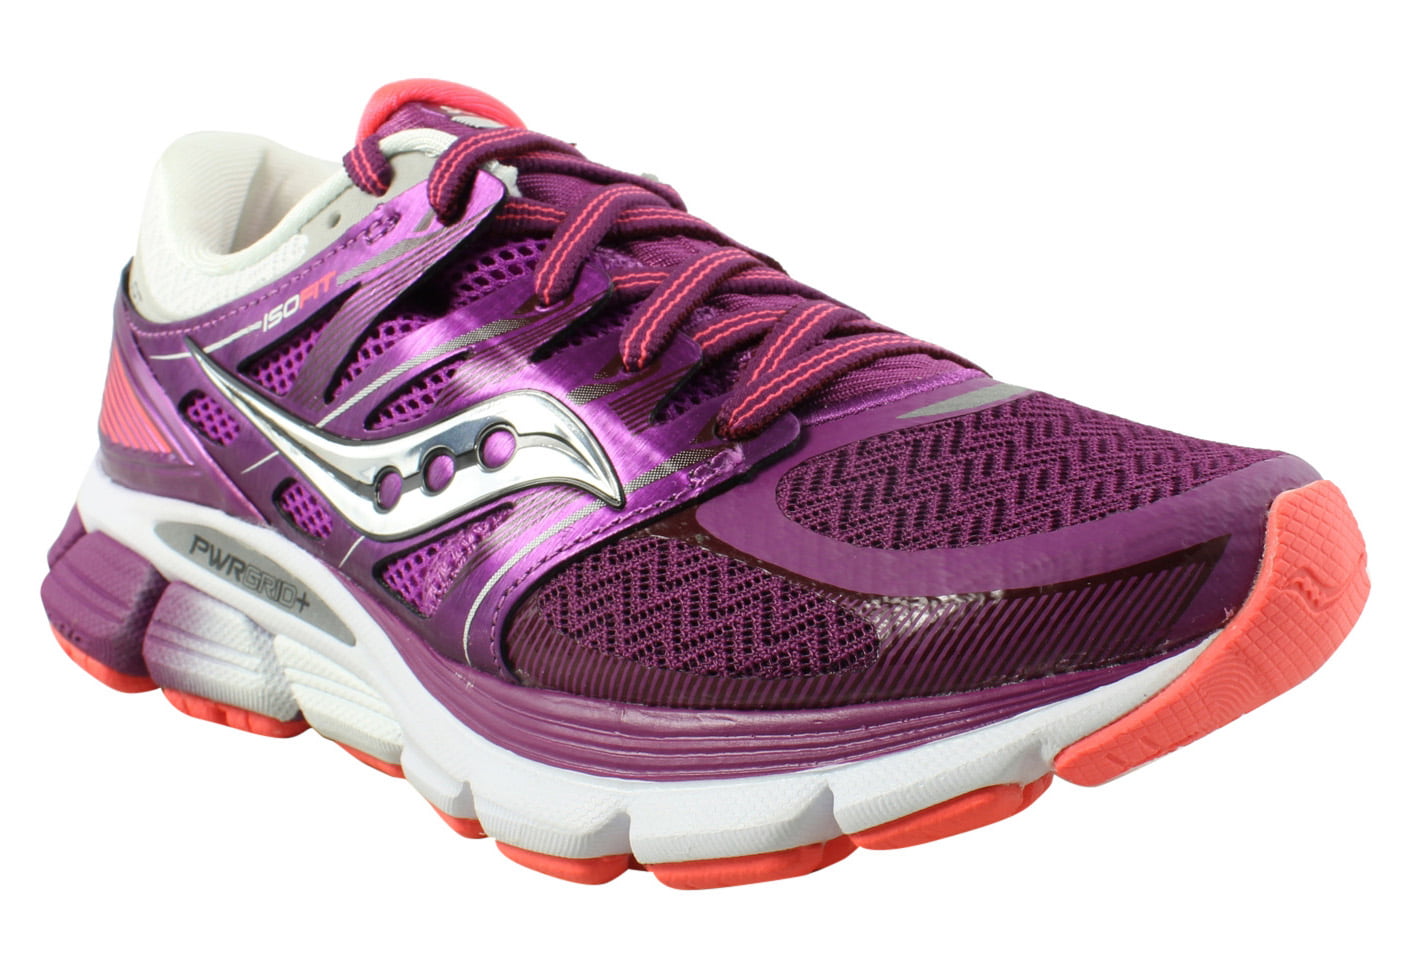 Saucony - New Saucony Womens Zealot Iso Purple/Coral Running Shoes Size ...